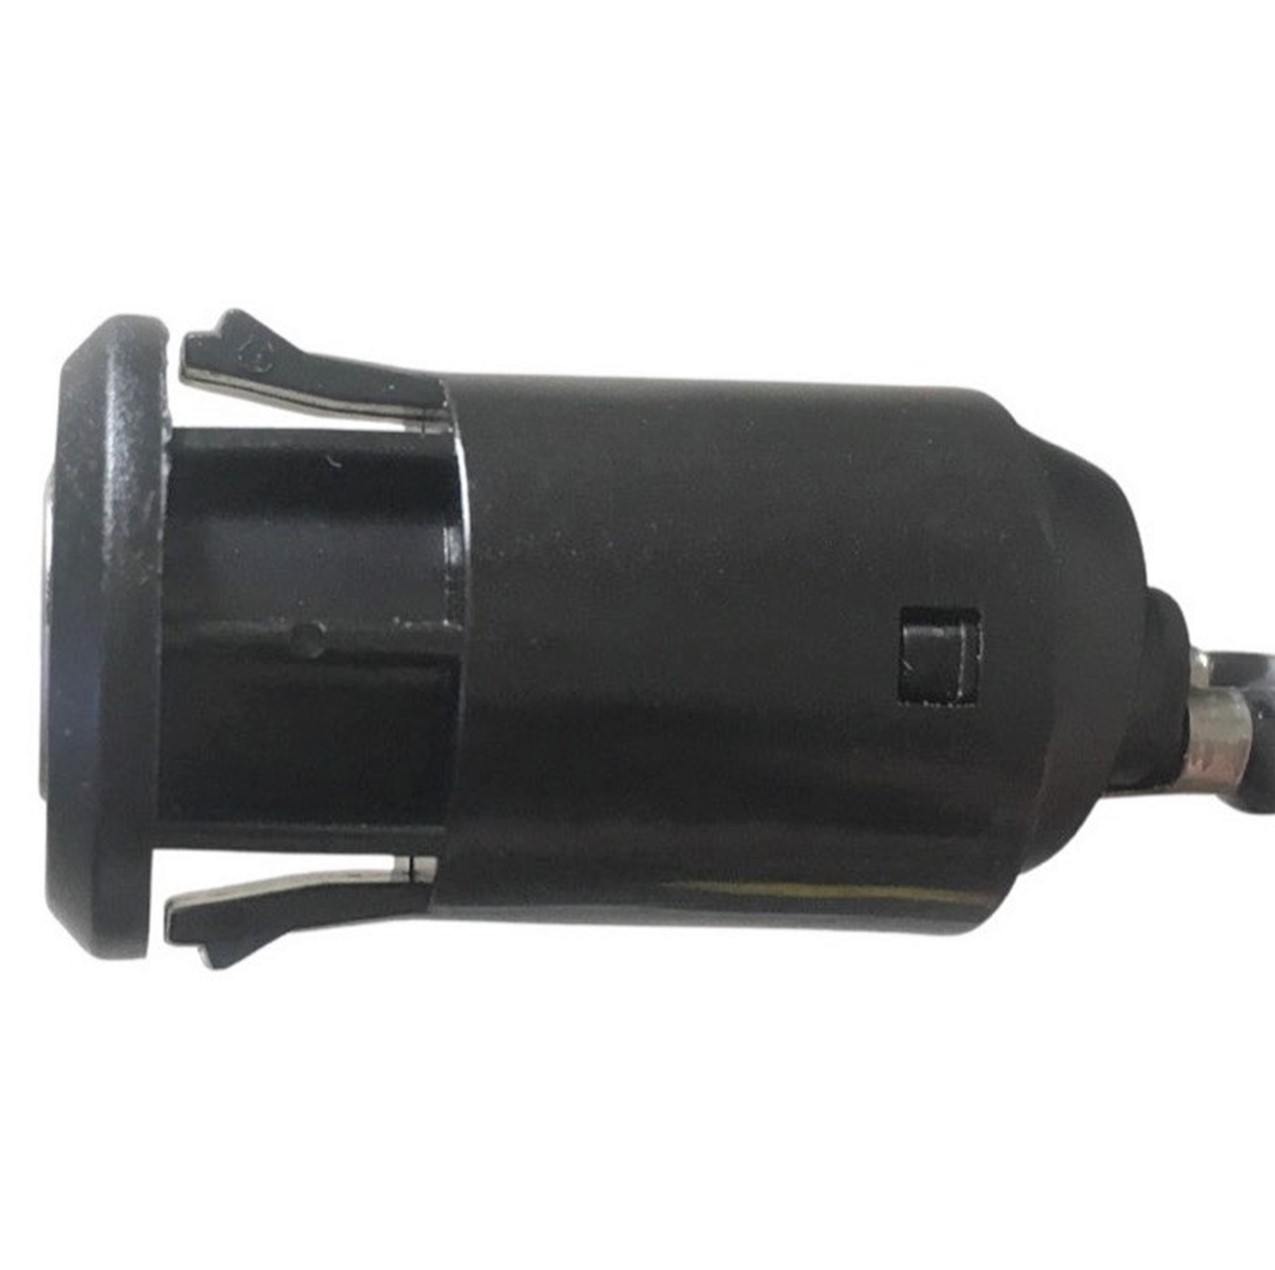 Ignition Switch Fits Many ATVs With Helmet Lock 4 Pin in 4 Pin Round Jack - Click Image to Close